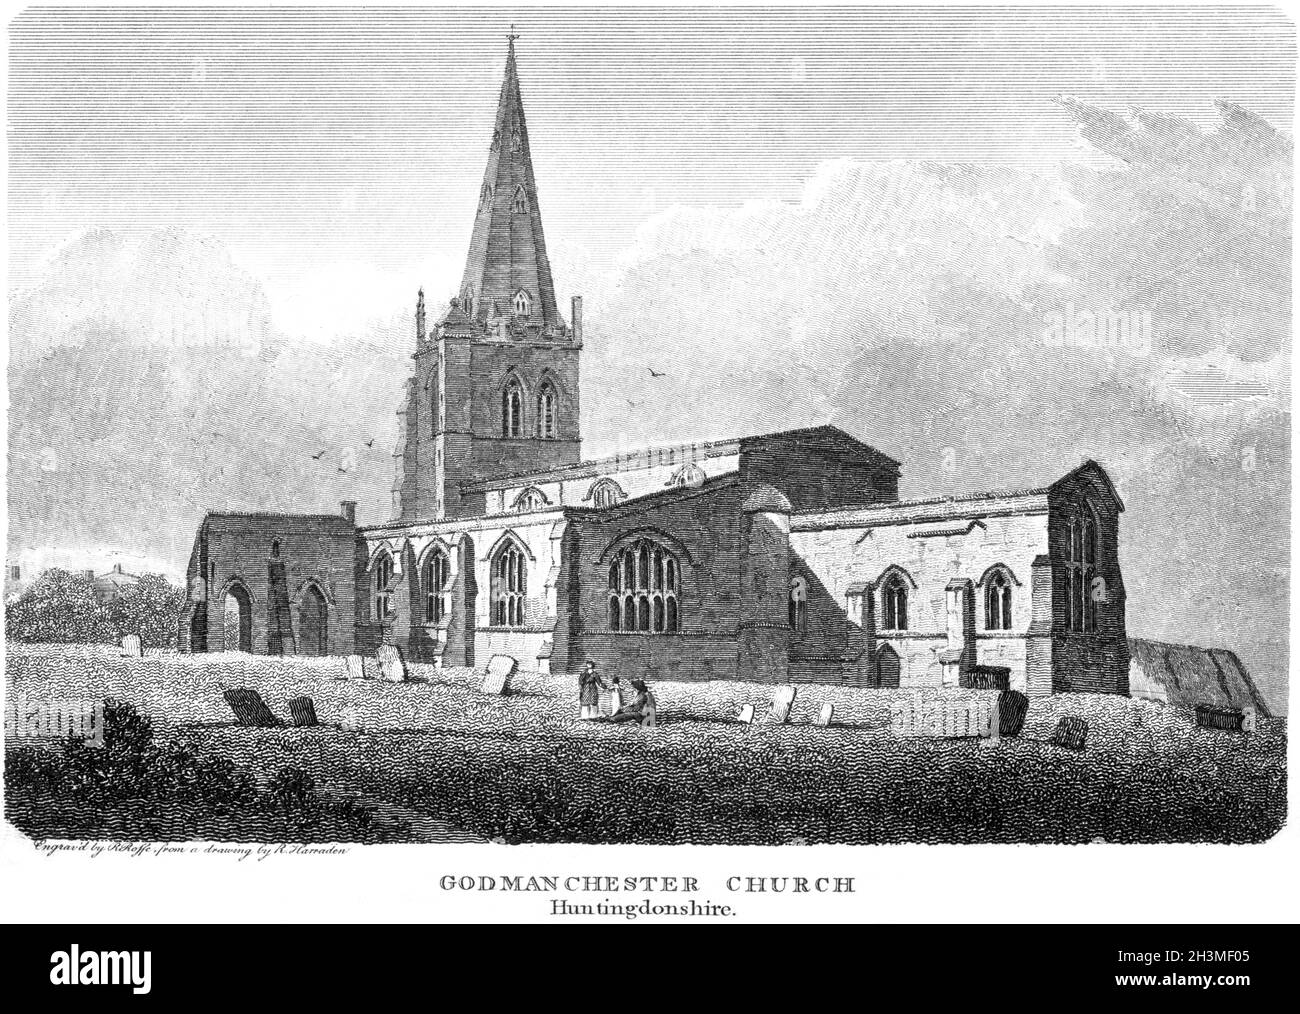 An engraving of Godmanchester Church, Huntingdonshire (now Cambridgeshire) UK scanned at high resolution from a book printed in 1812. Stock Photo